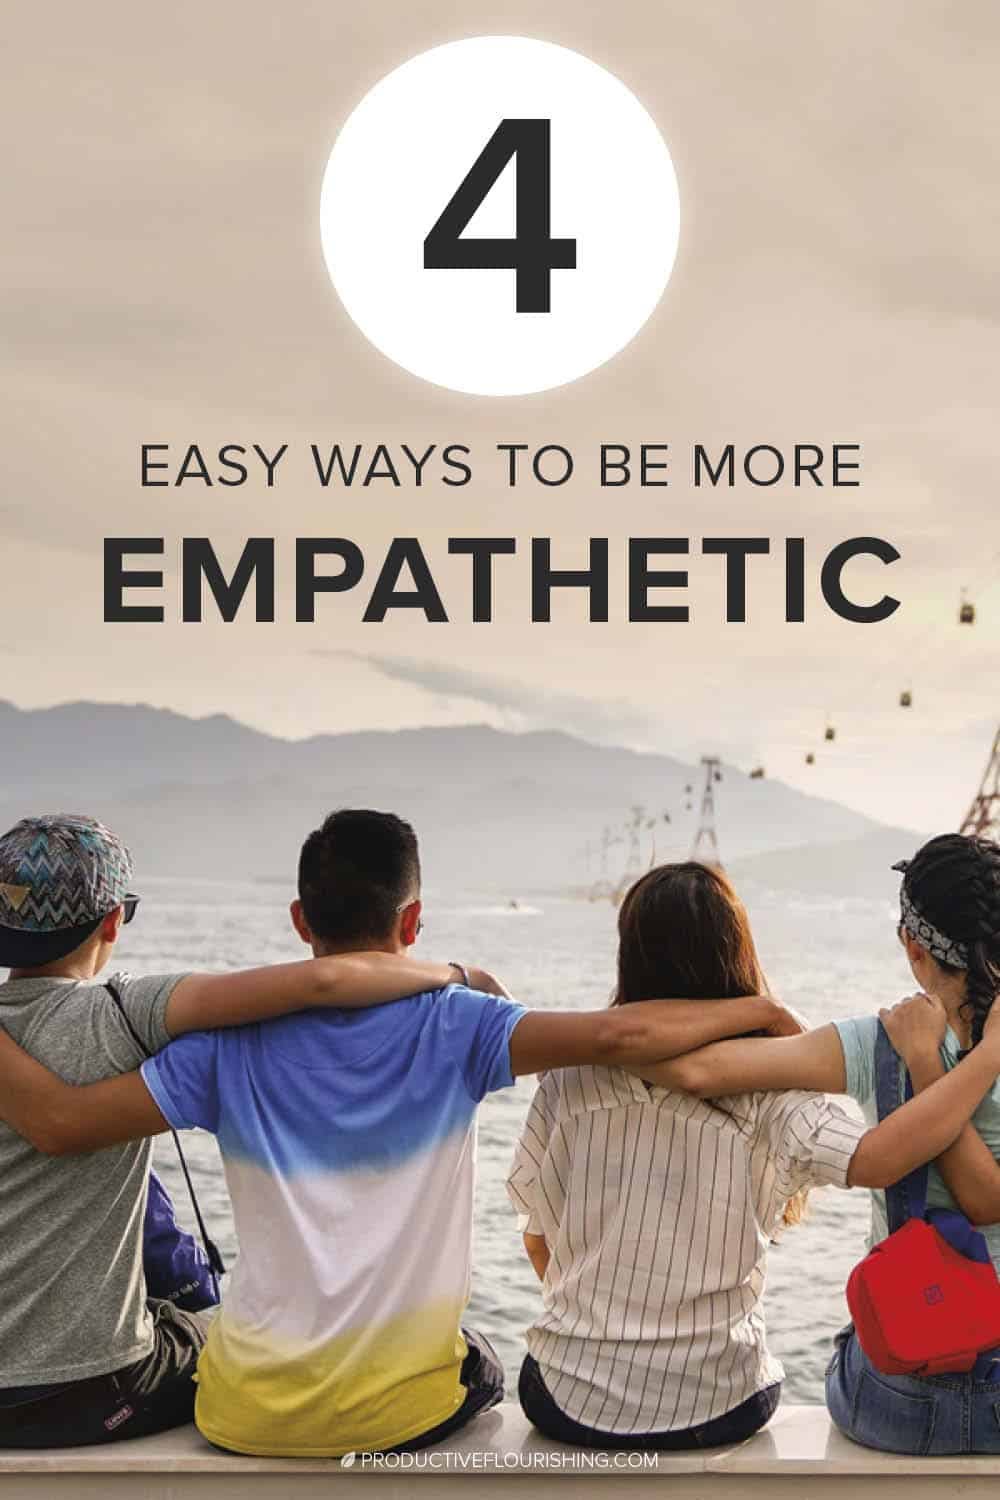 Using these 4 steps will help you not only develop your skill but also inspire others to do the same. Read the four ways to cultivate empathy. #productiveflourishing #empathy #entrepreneurinspiration